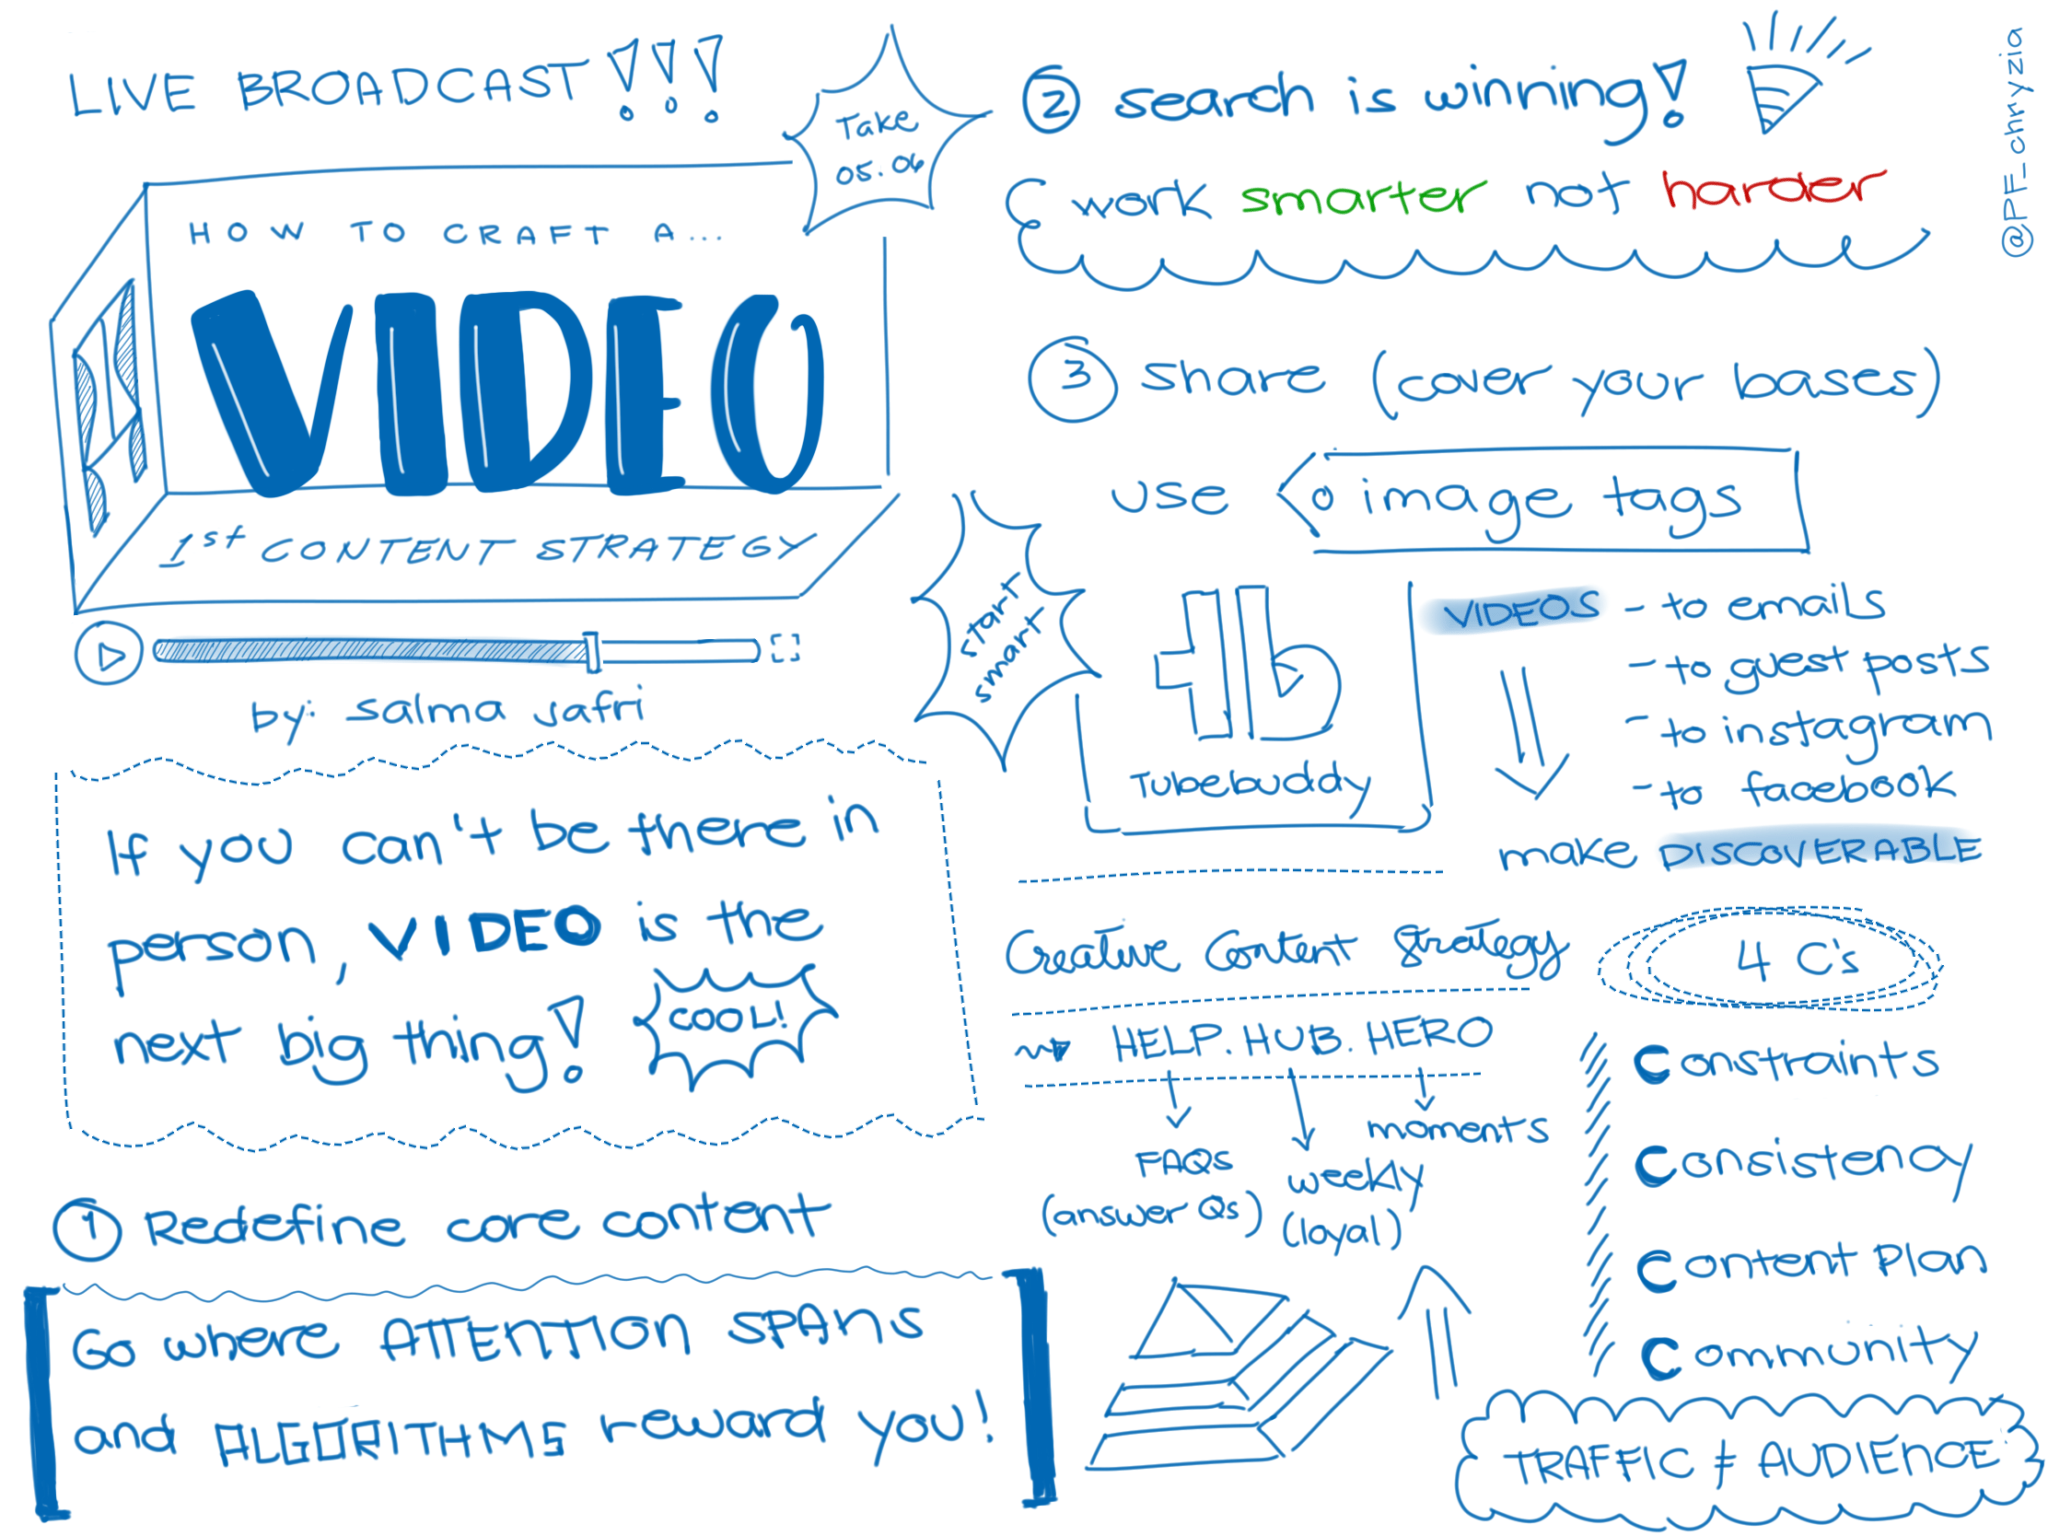 How To Craft A Video sketch note